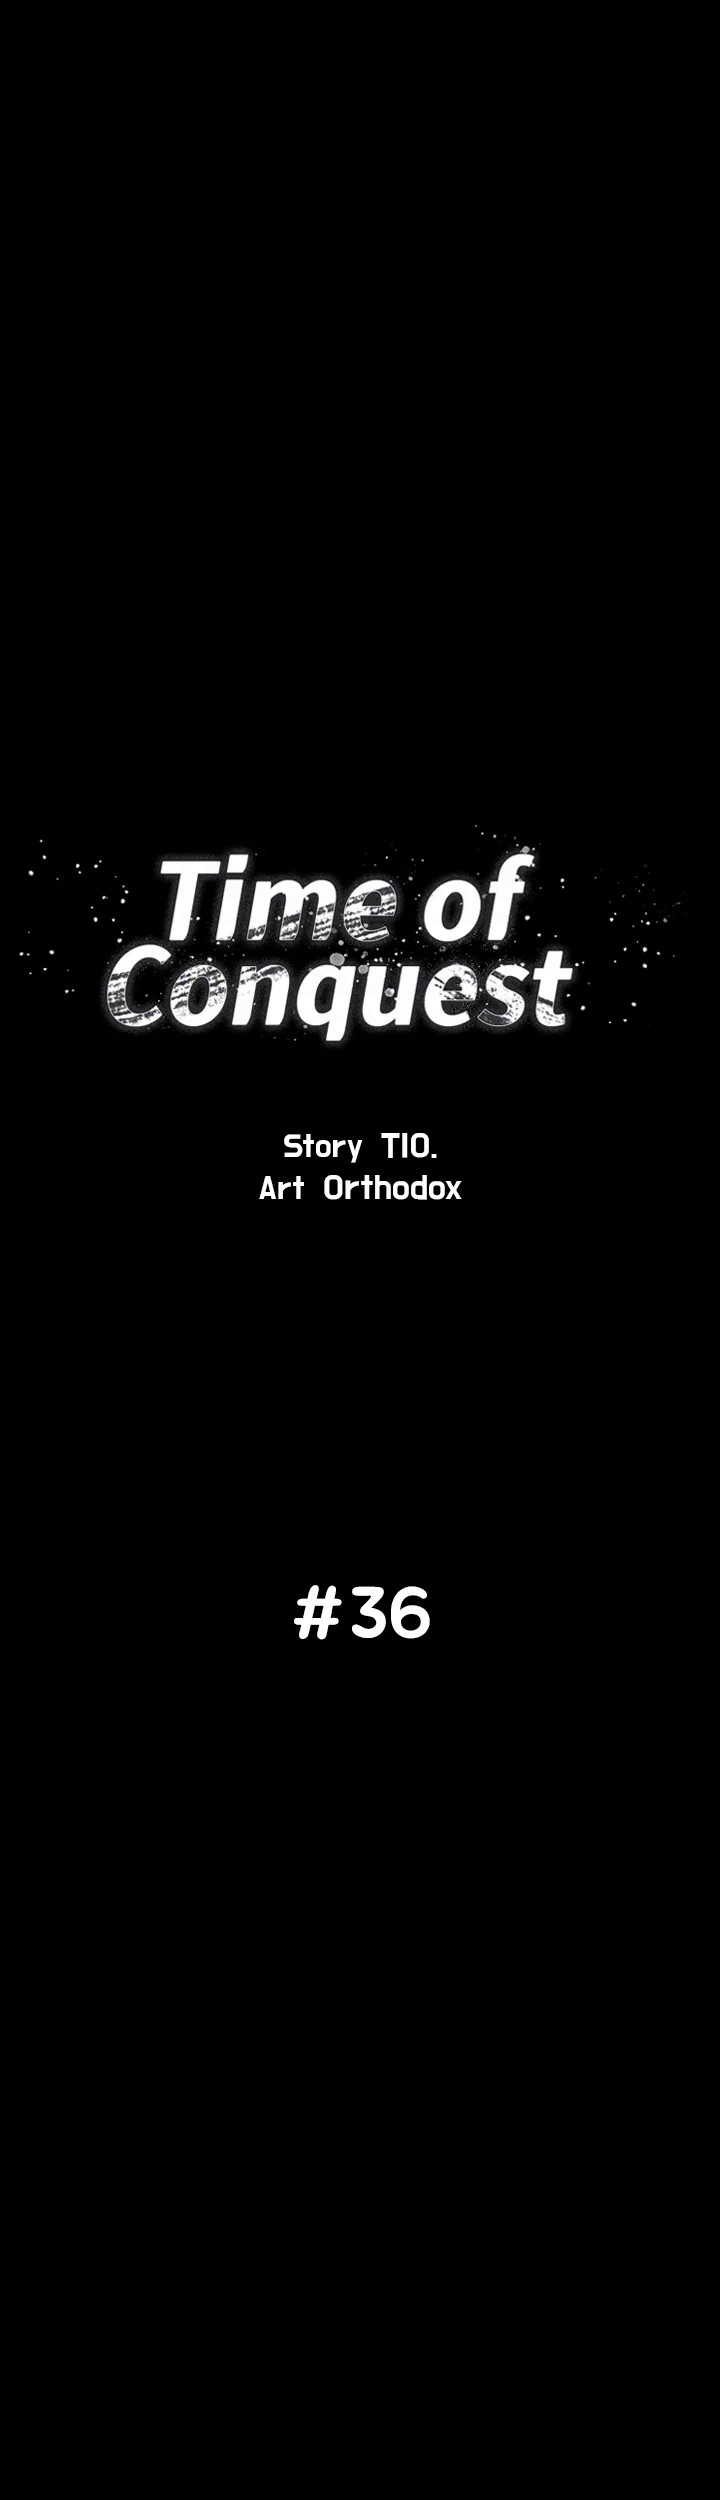 Time of Conquest image